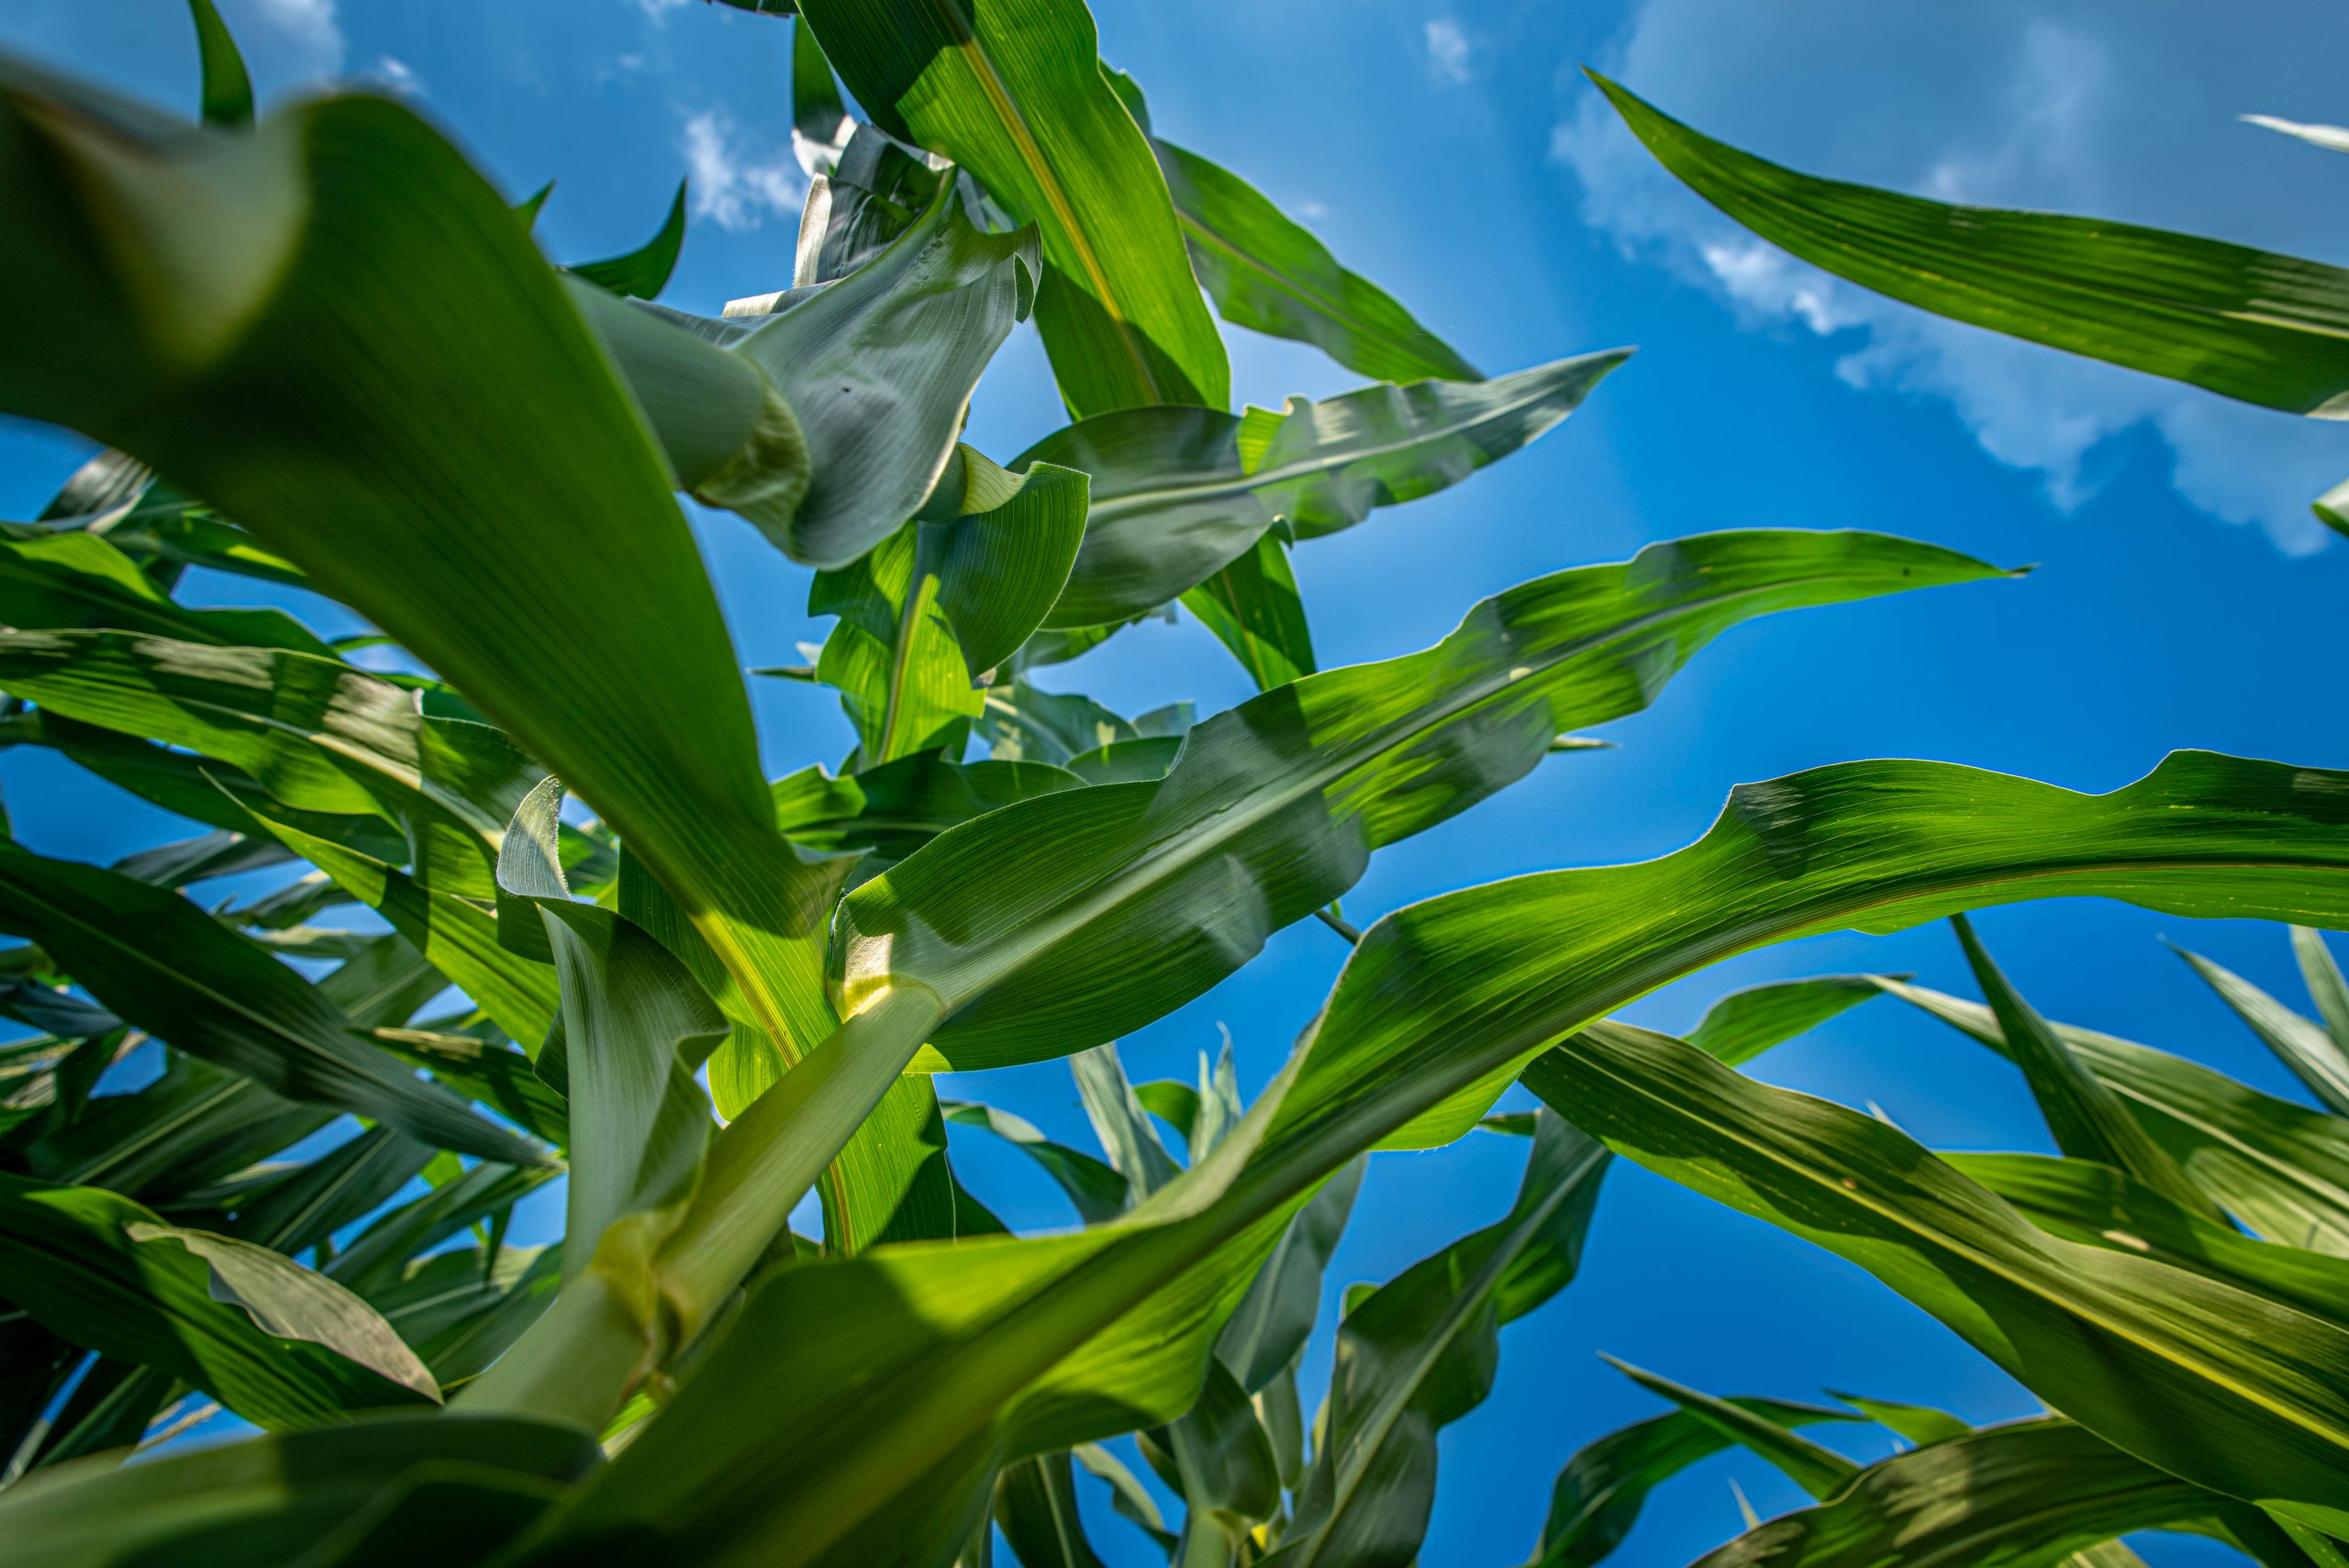 FBN Invests in AgriSecure to Help Farmers Succeed at Organics